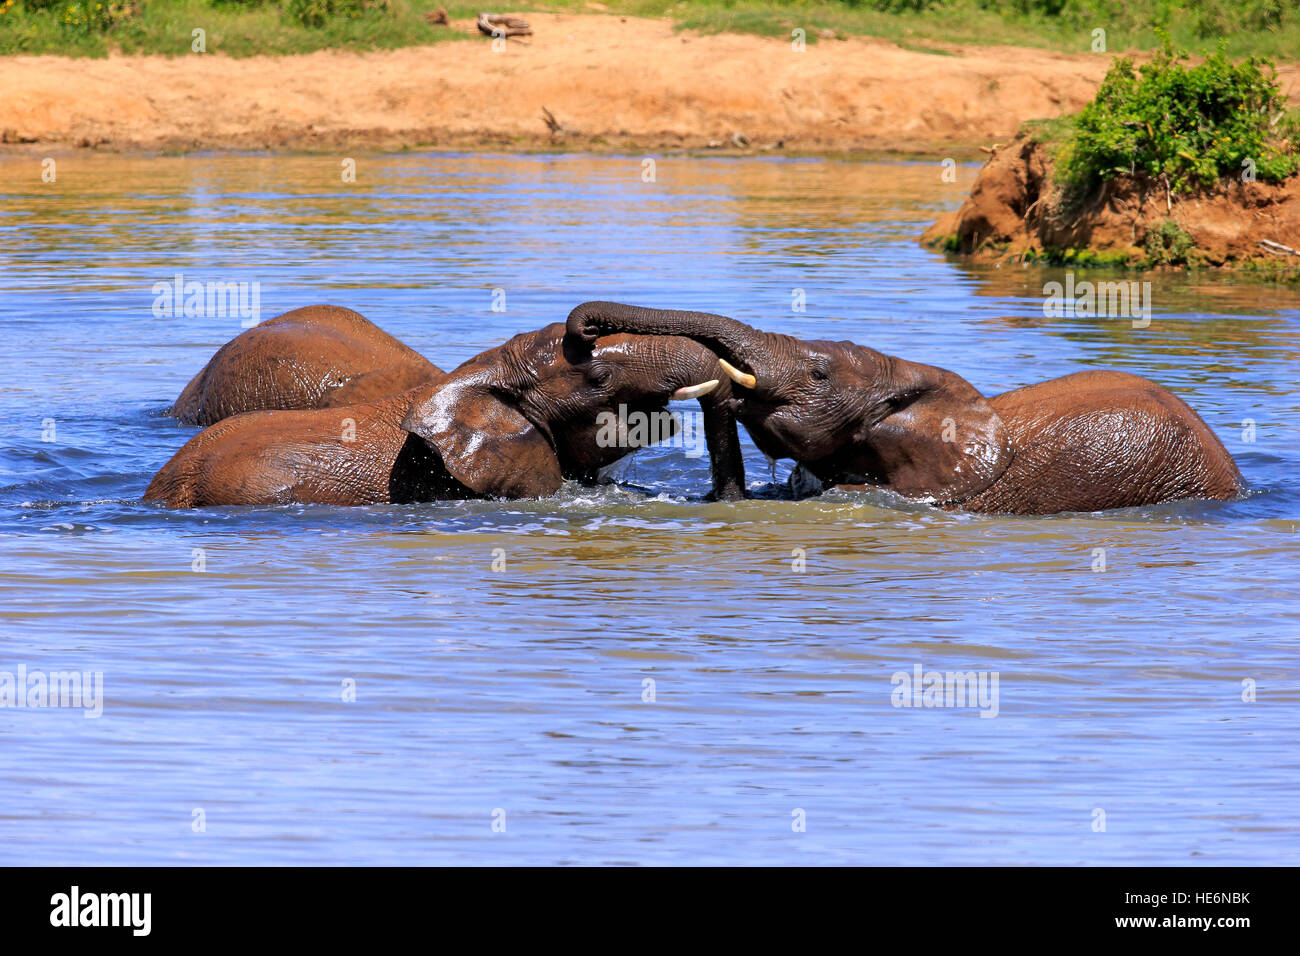 African Elephant, (Loxodonta africana), fighting in water, Addo Elephant Nationalpark, Eastern Cape, South Africa, Africa Stock Photo